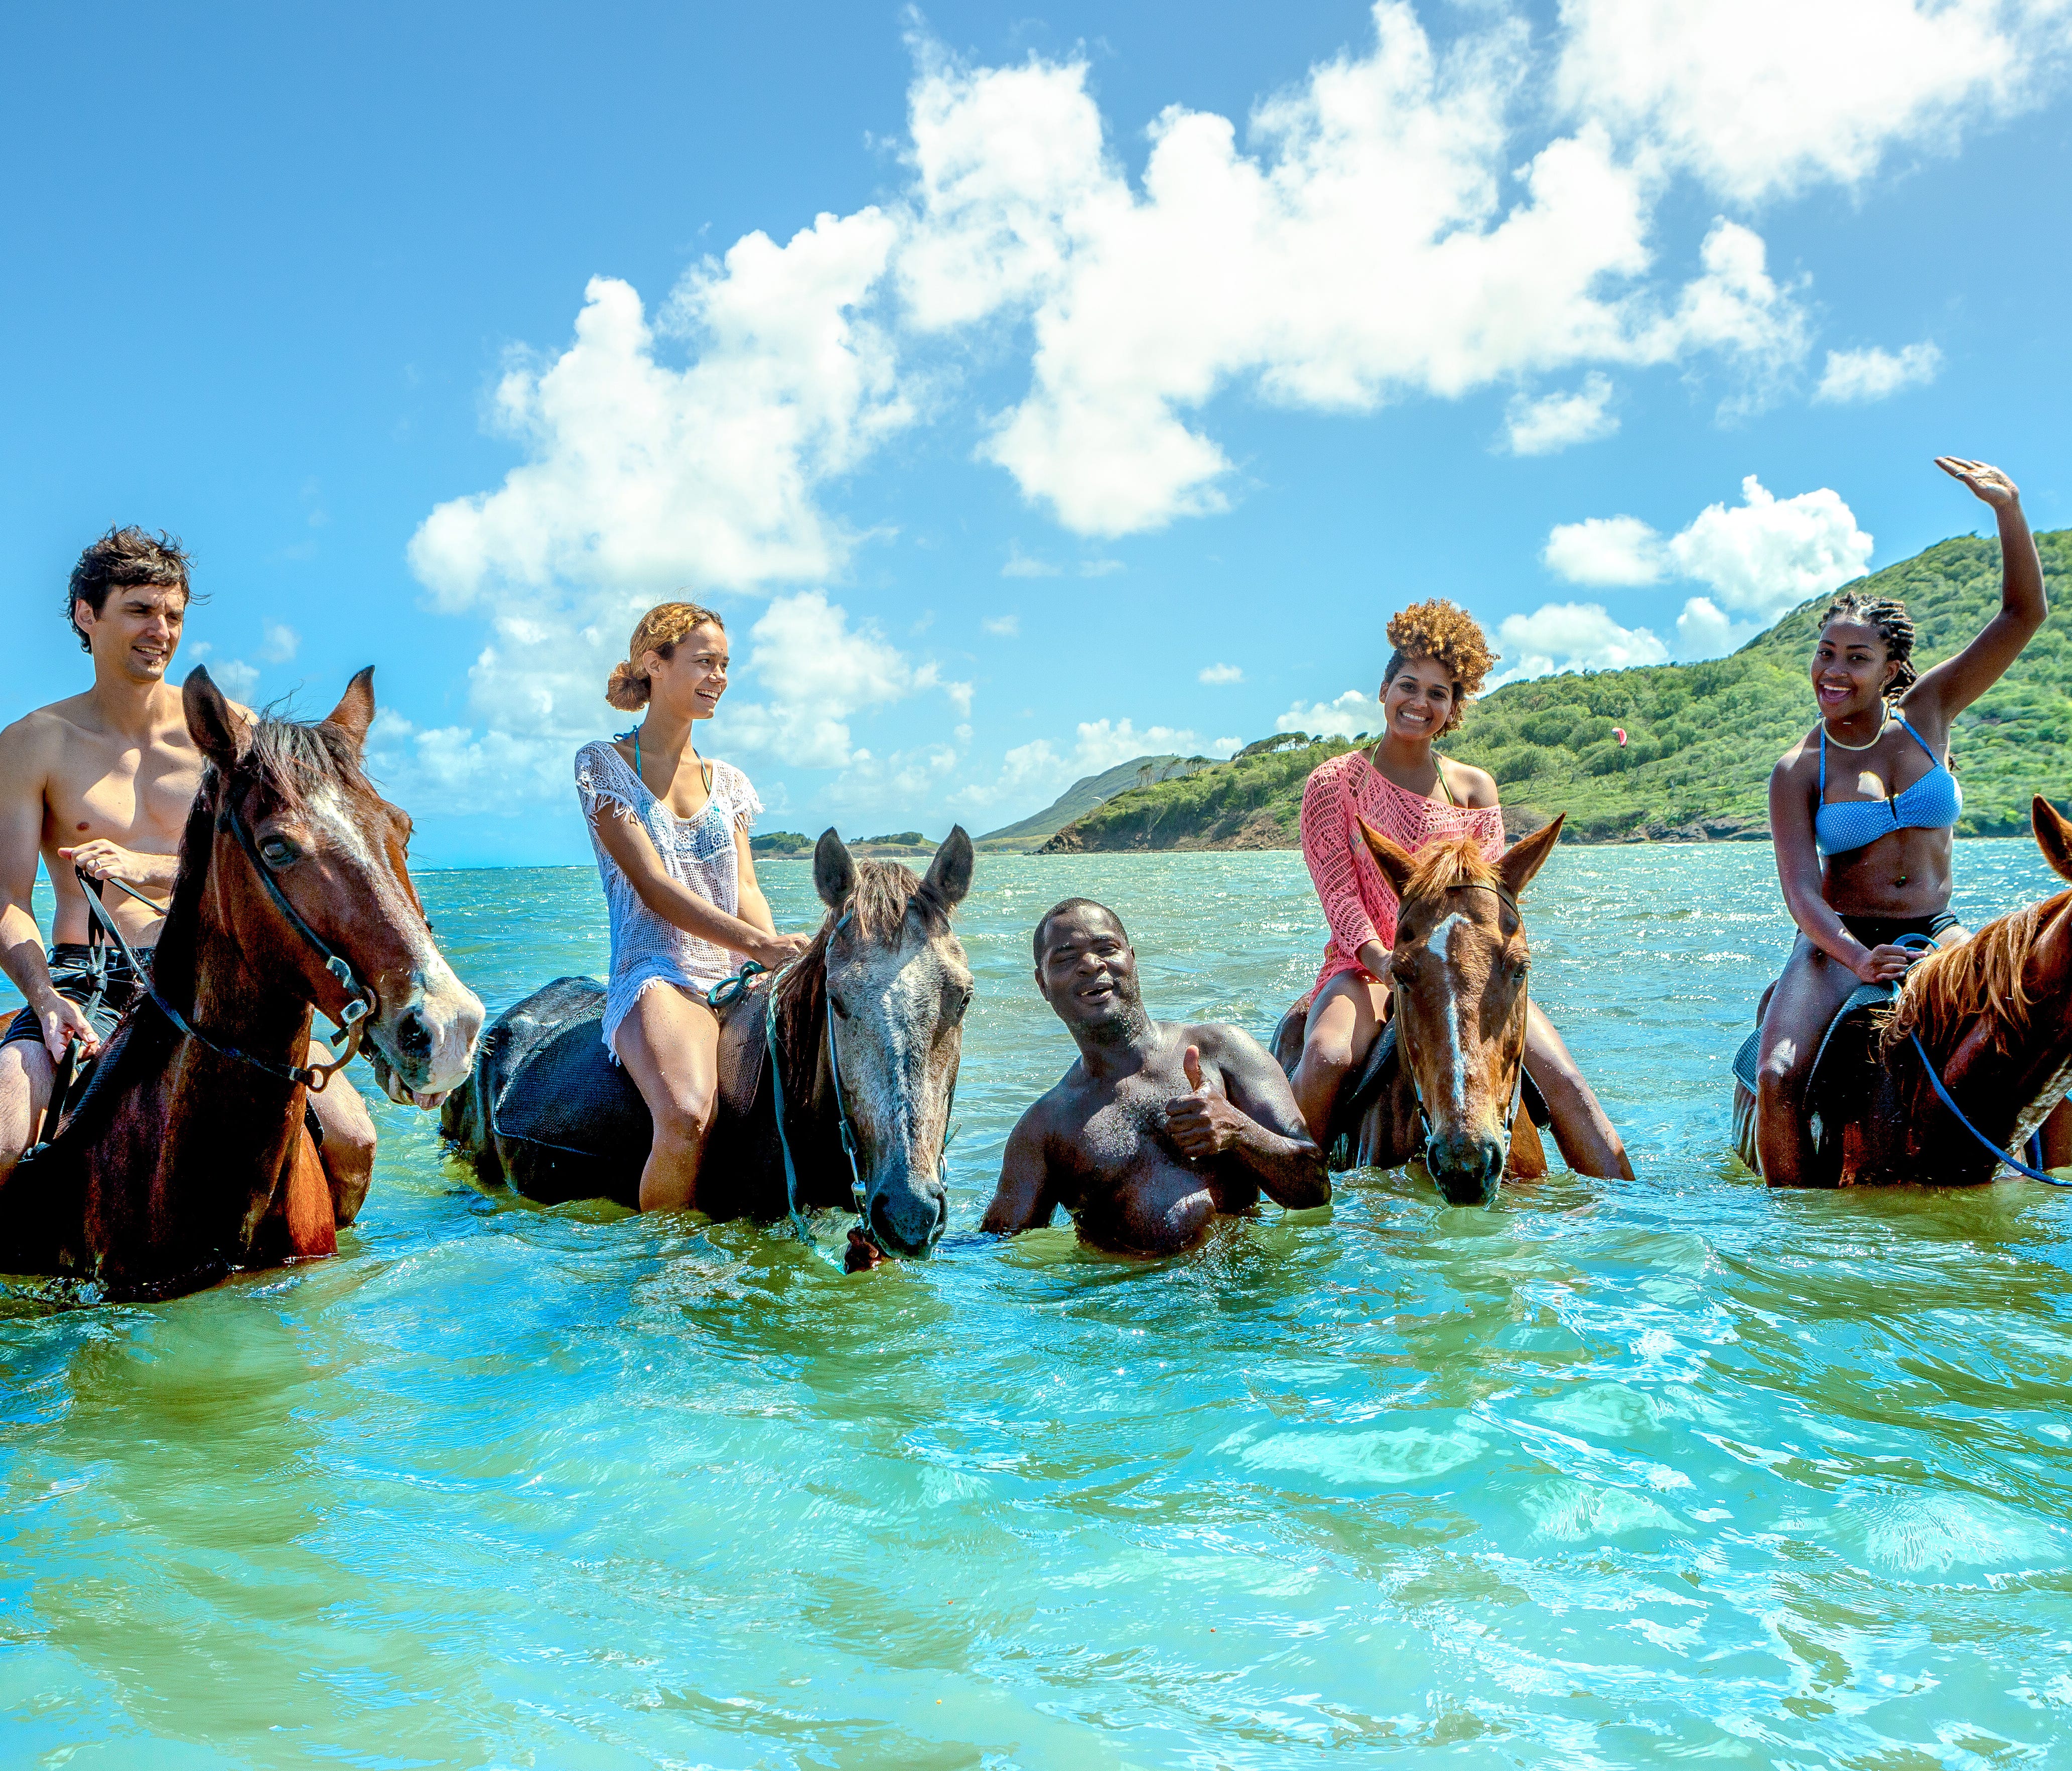 Island Routes Caribbean Adventure Tours offers horseback rides and swim adventures on Jamaica and St. Lucia.